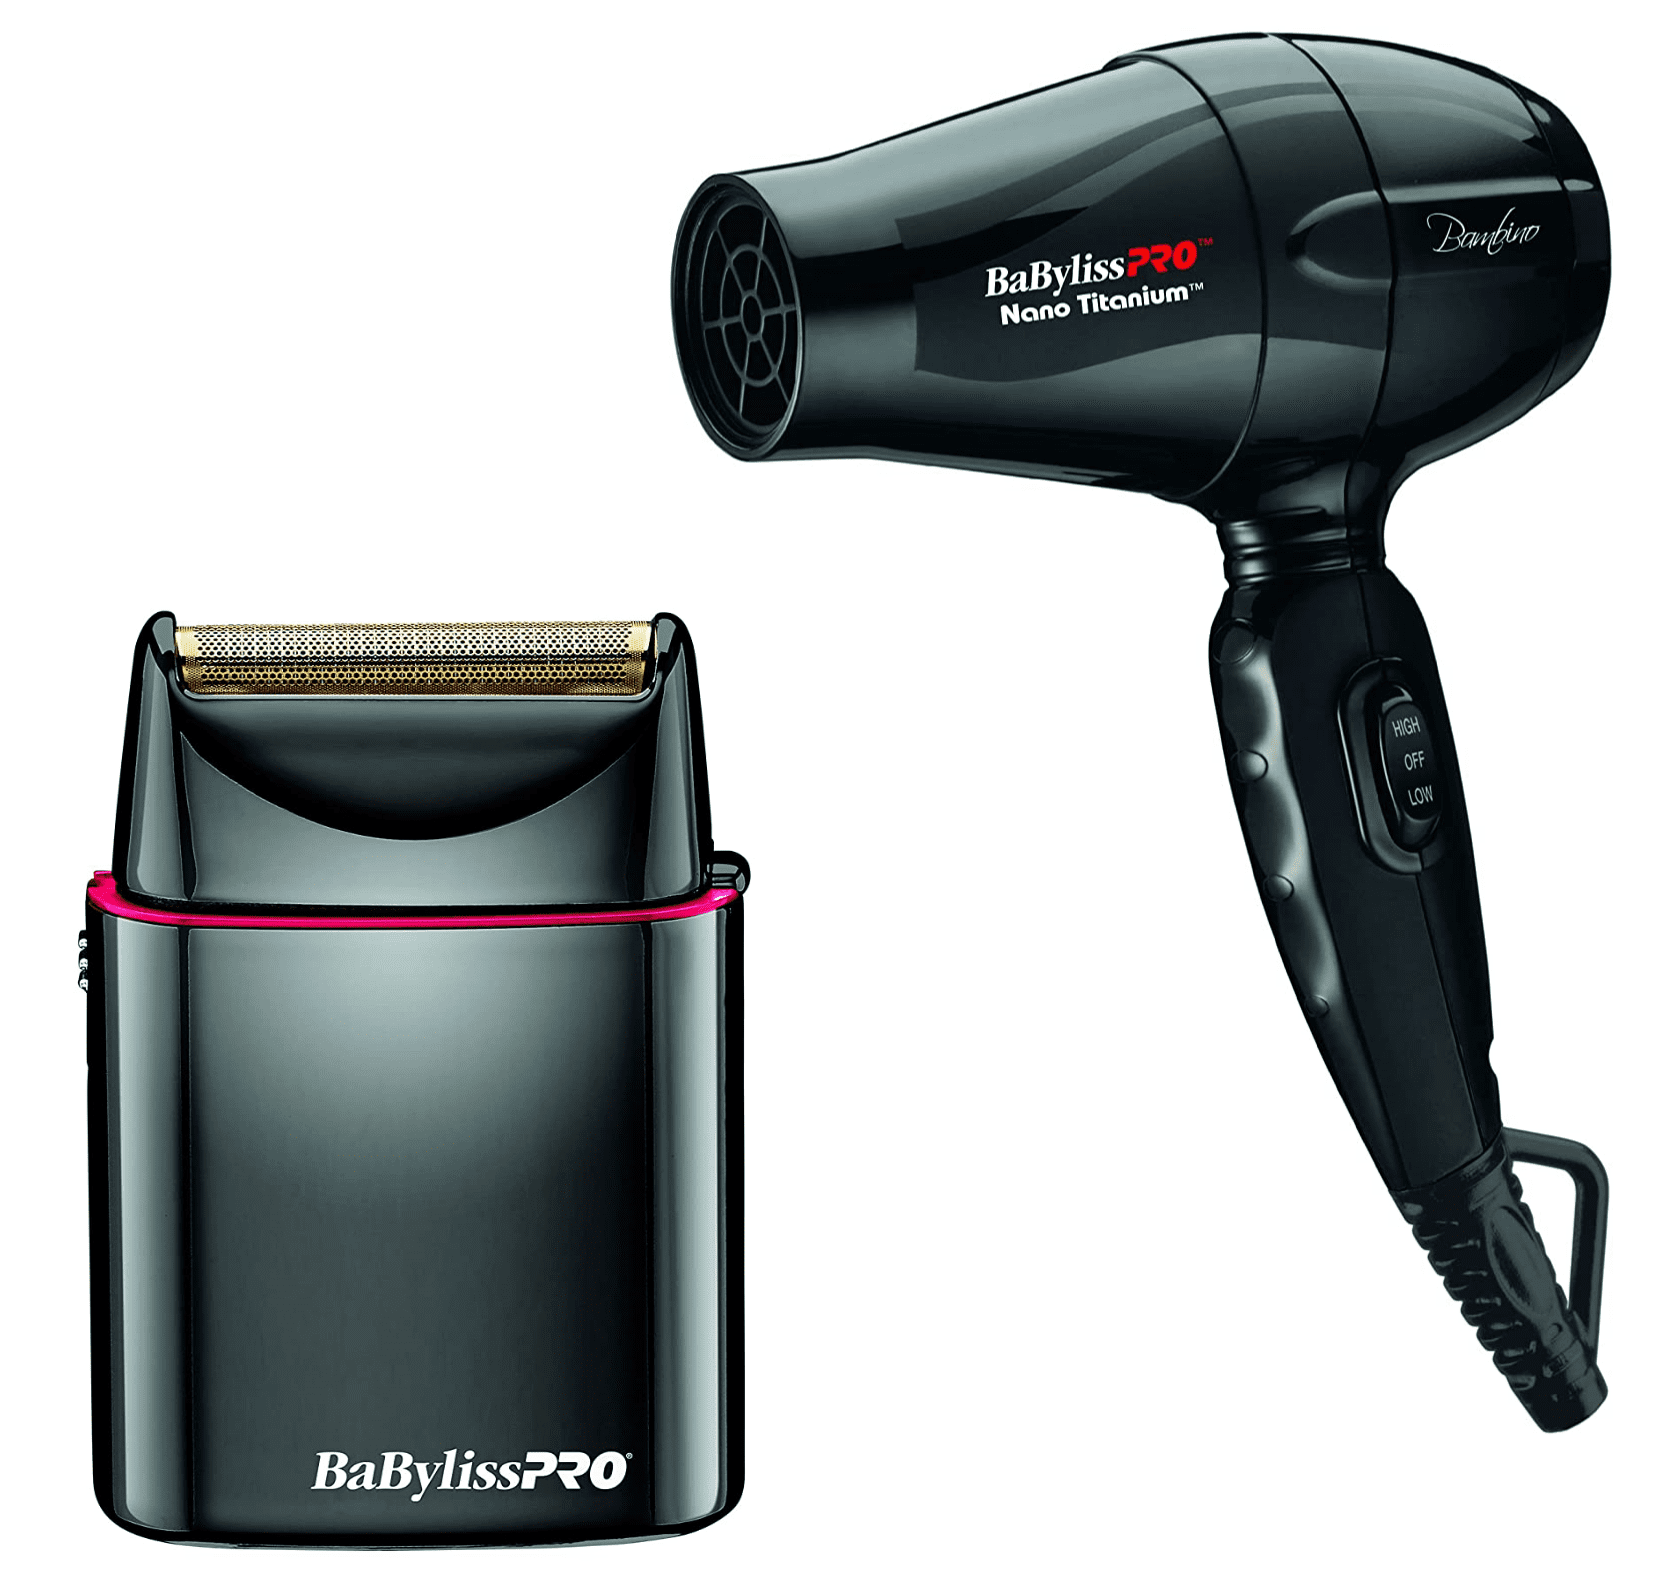 best hair clippers for bald men